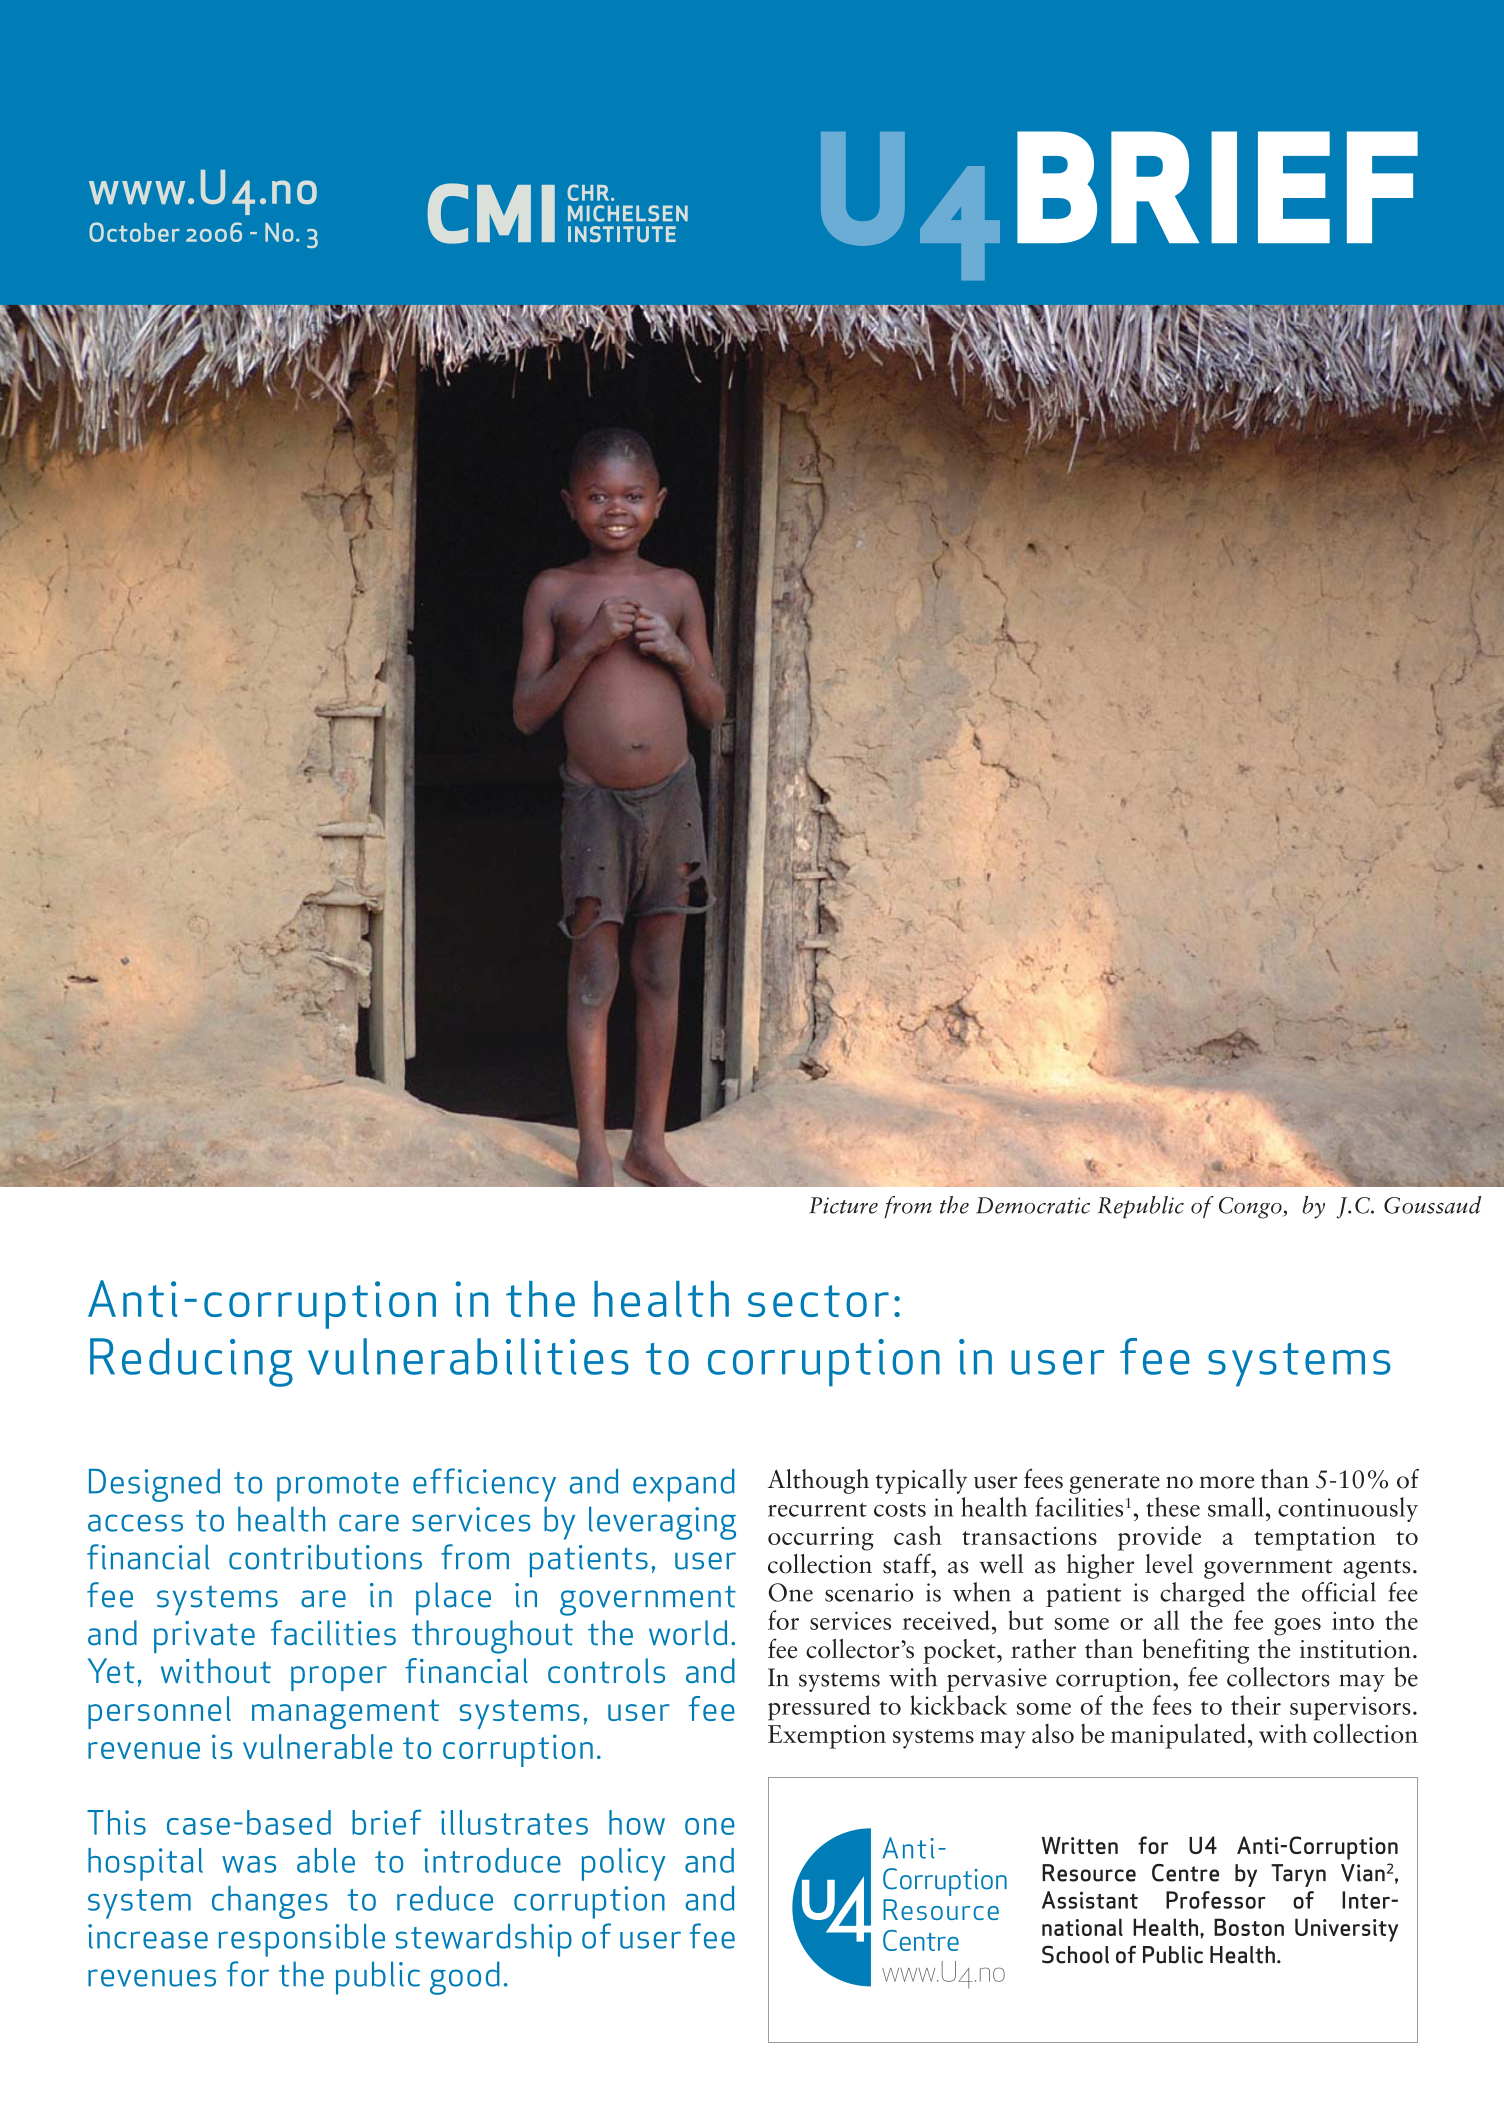 Anti-corruption in the health sector: Reducing vulnerabilities to corruption in user fee systems 